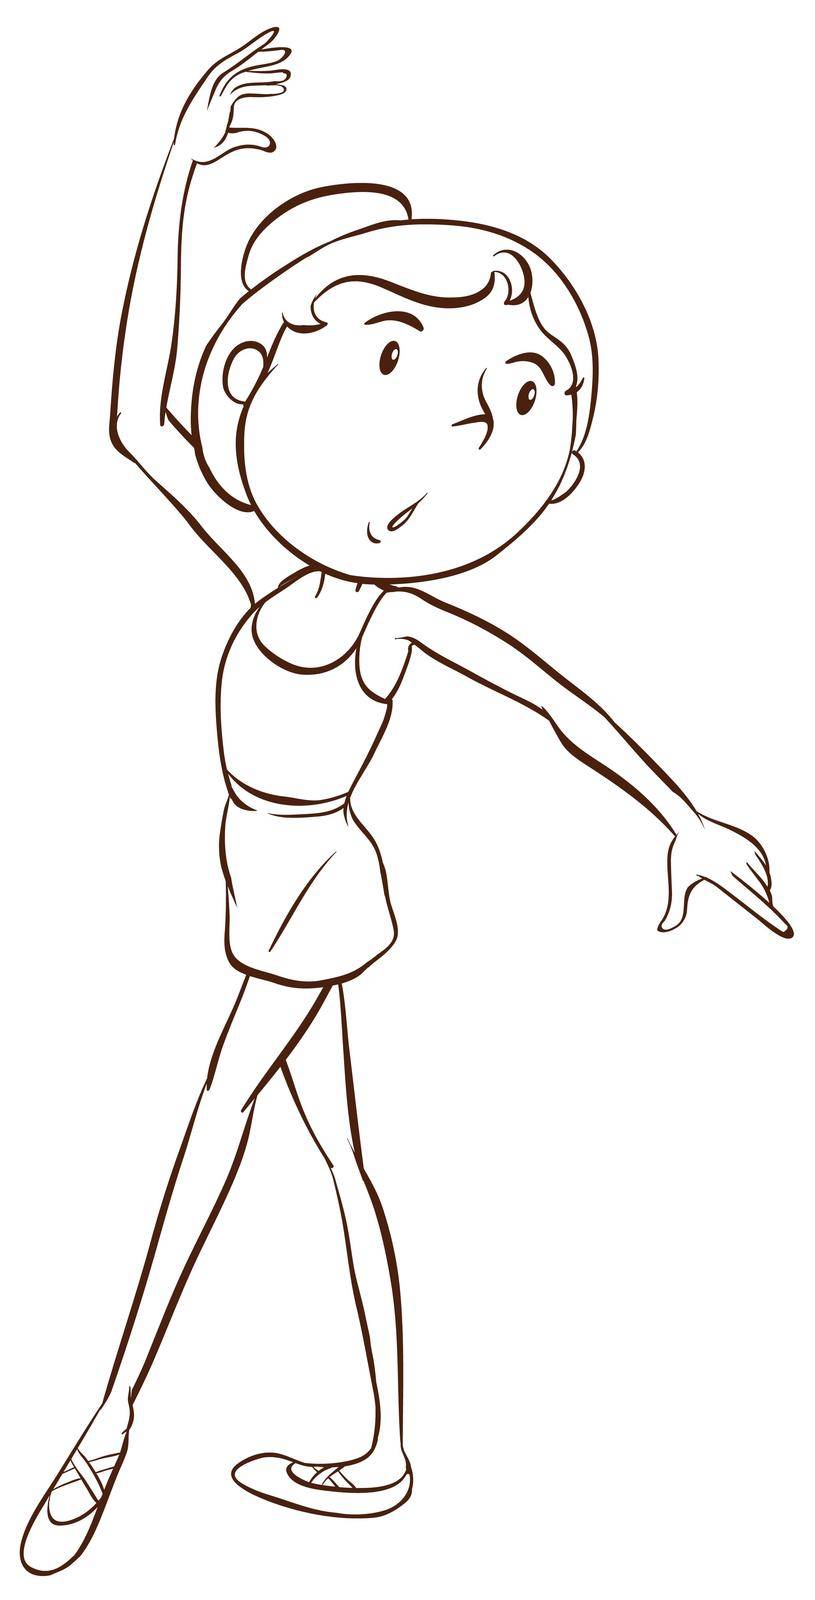 Illustration of a simple sketch of a ballet dancer on a white background